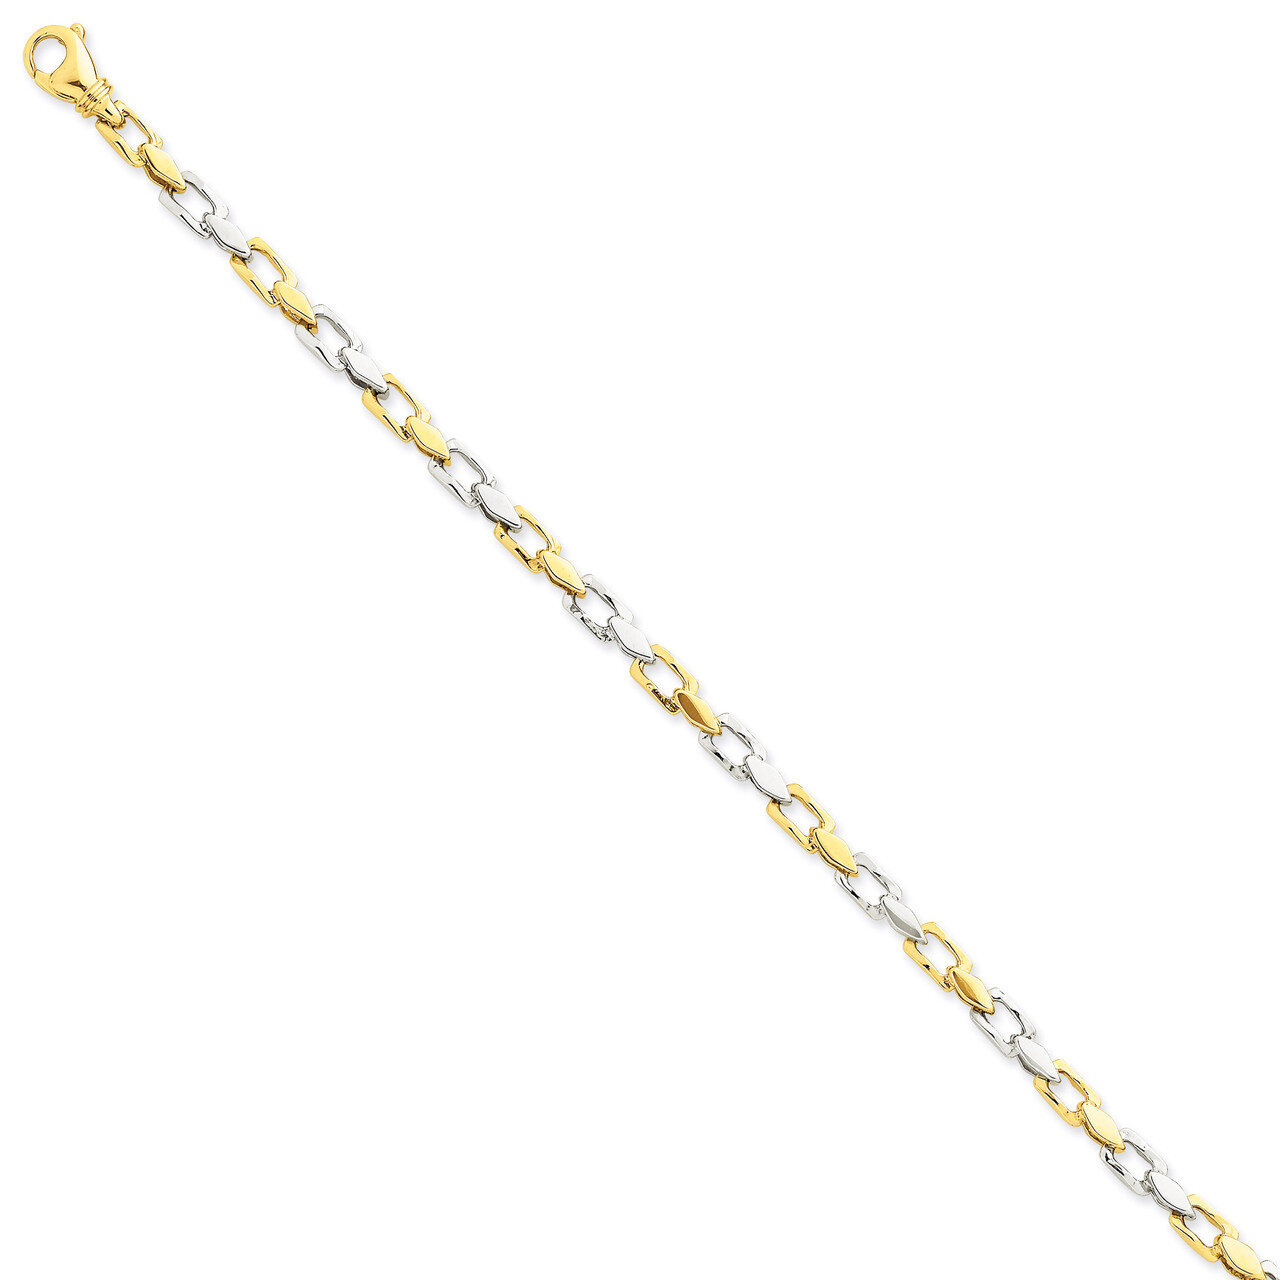 4.5mm Hand-Polished Fancy Link Chain 18 Inch 14k Two-Tone Gold LK305A-18